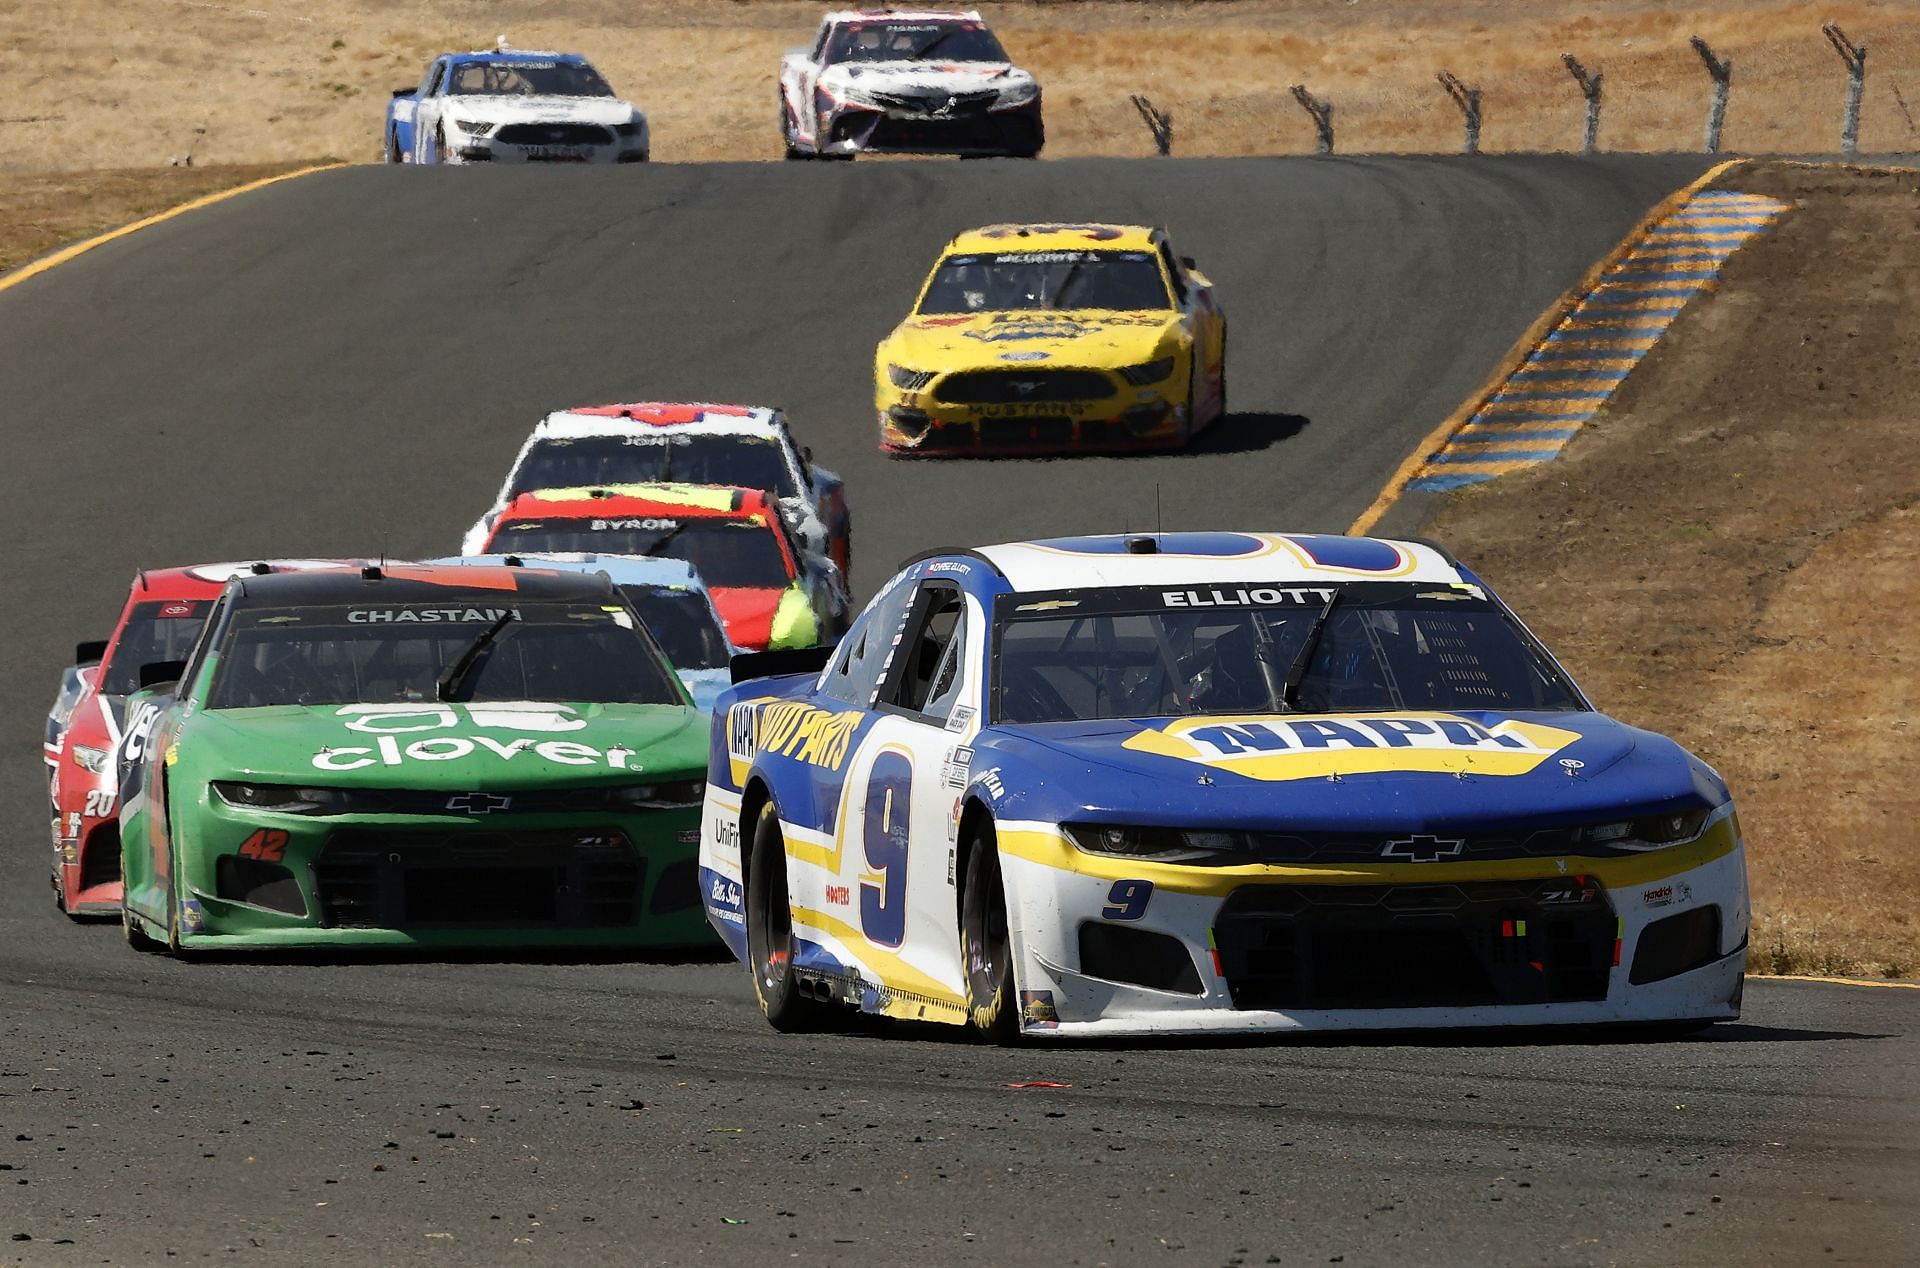 Chase Elliott leads the field during the 2021 NASCAR Cup Series Toyota/Save Mart 350 at Sonoma Raceway in Sonoma, California. (Photo by Maddie Meyer/Getty Images)